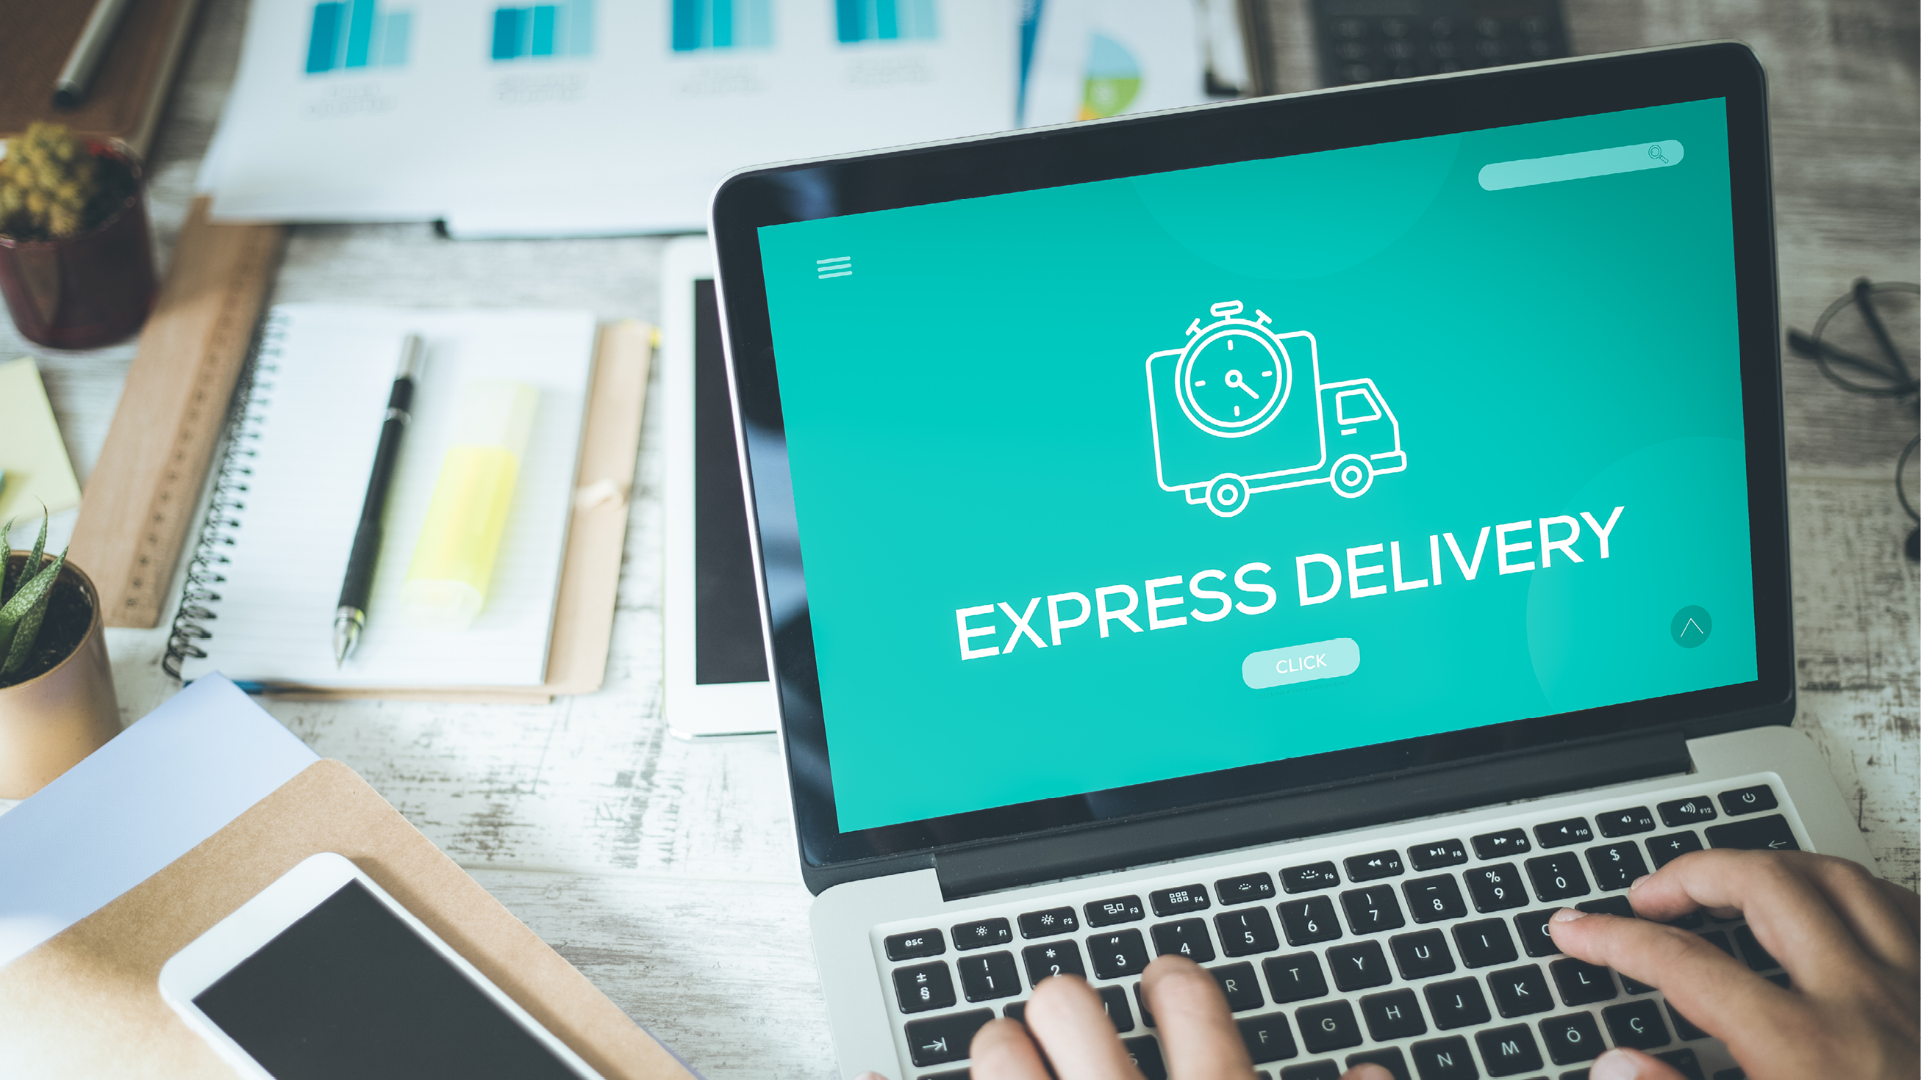 Express delivery on a laptop